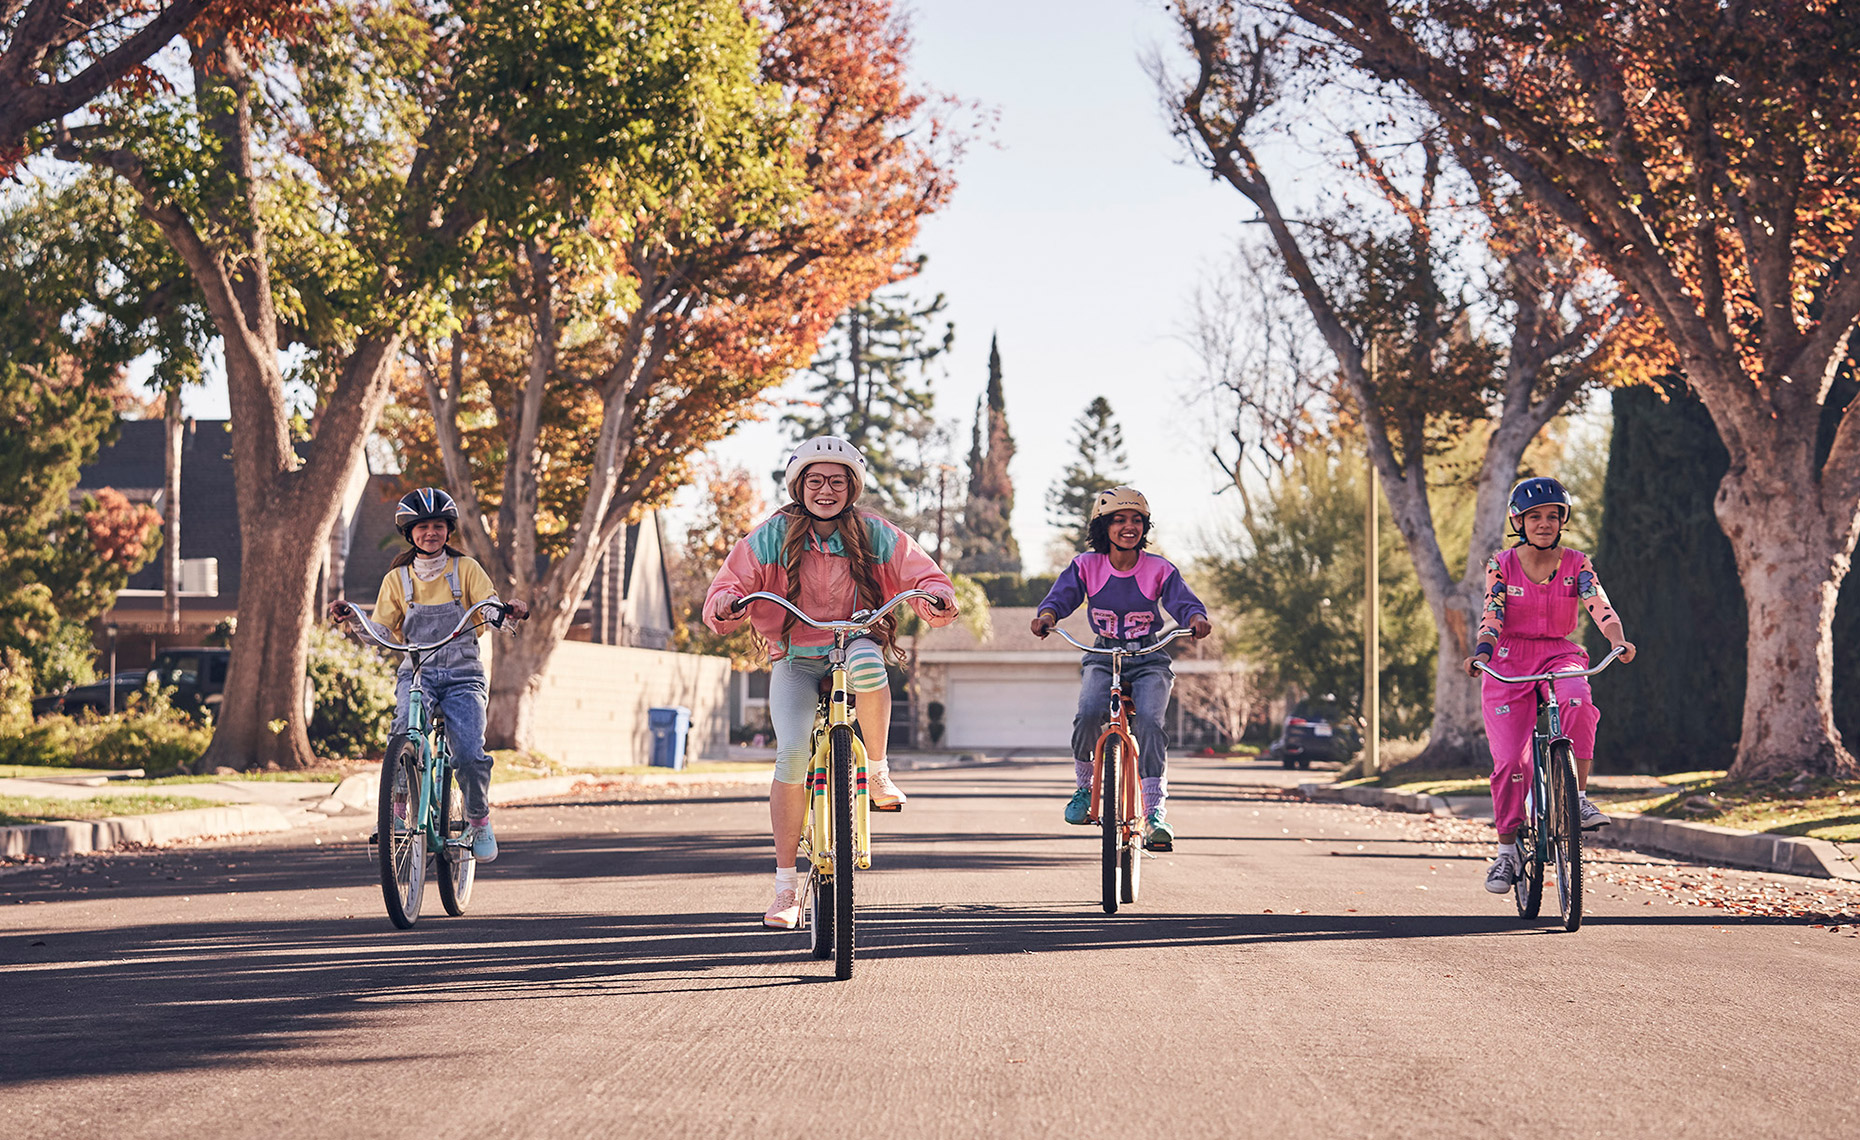 Commercial Healthcare Photography by Roger Snider - Girlfriends ride bikes in the 1980s in Norwalk CA